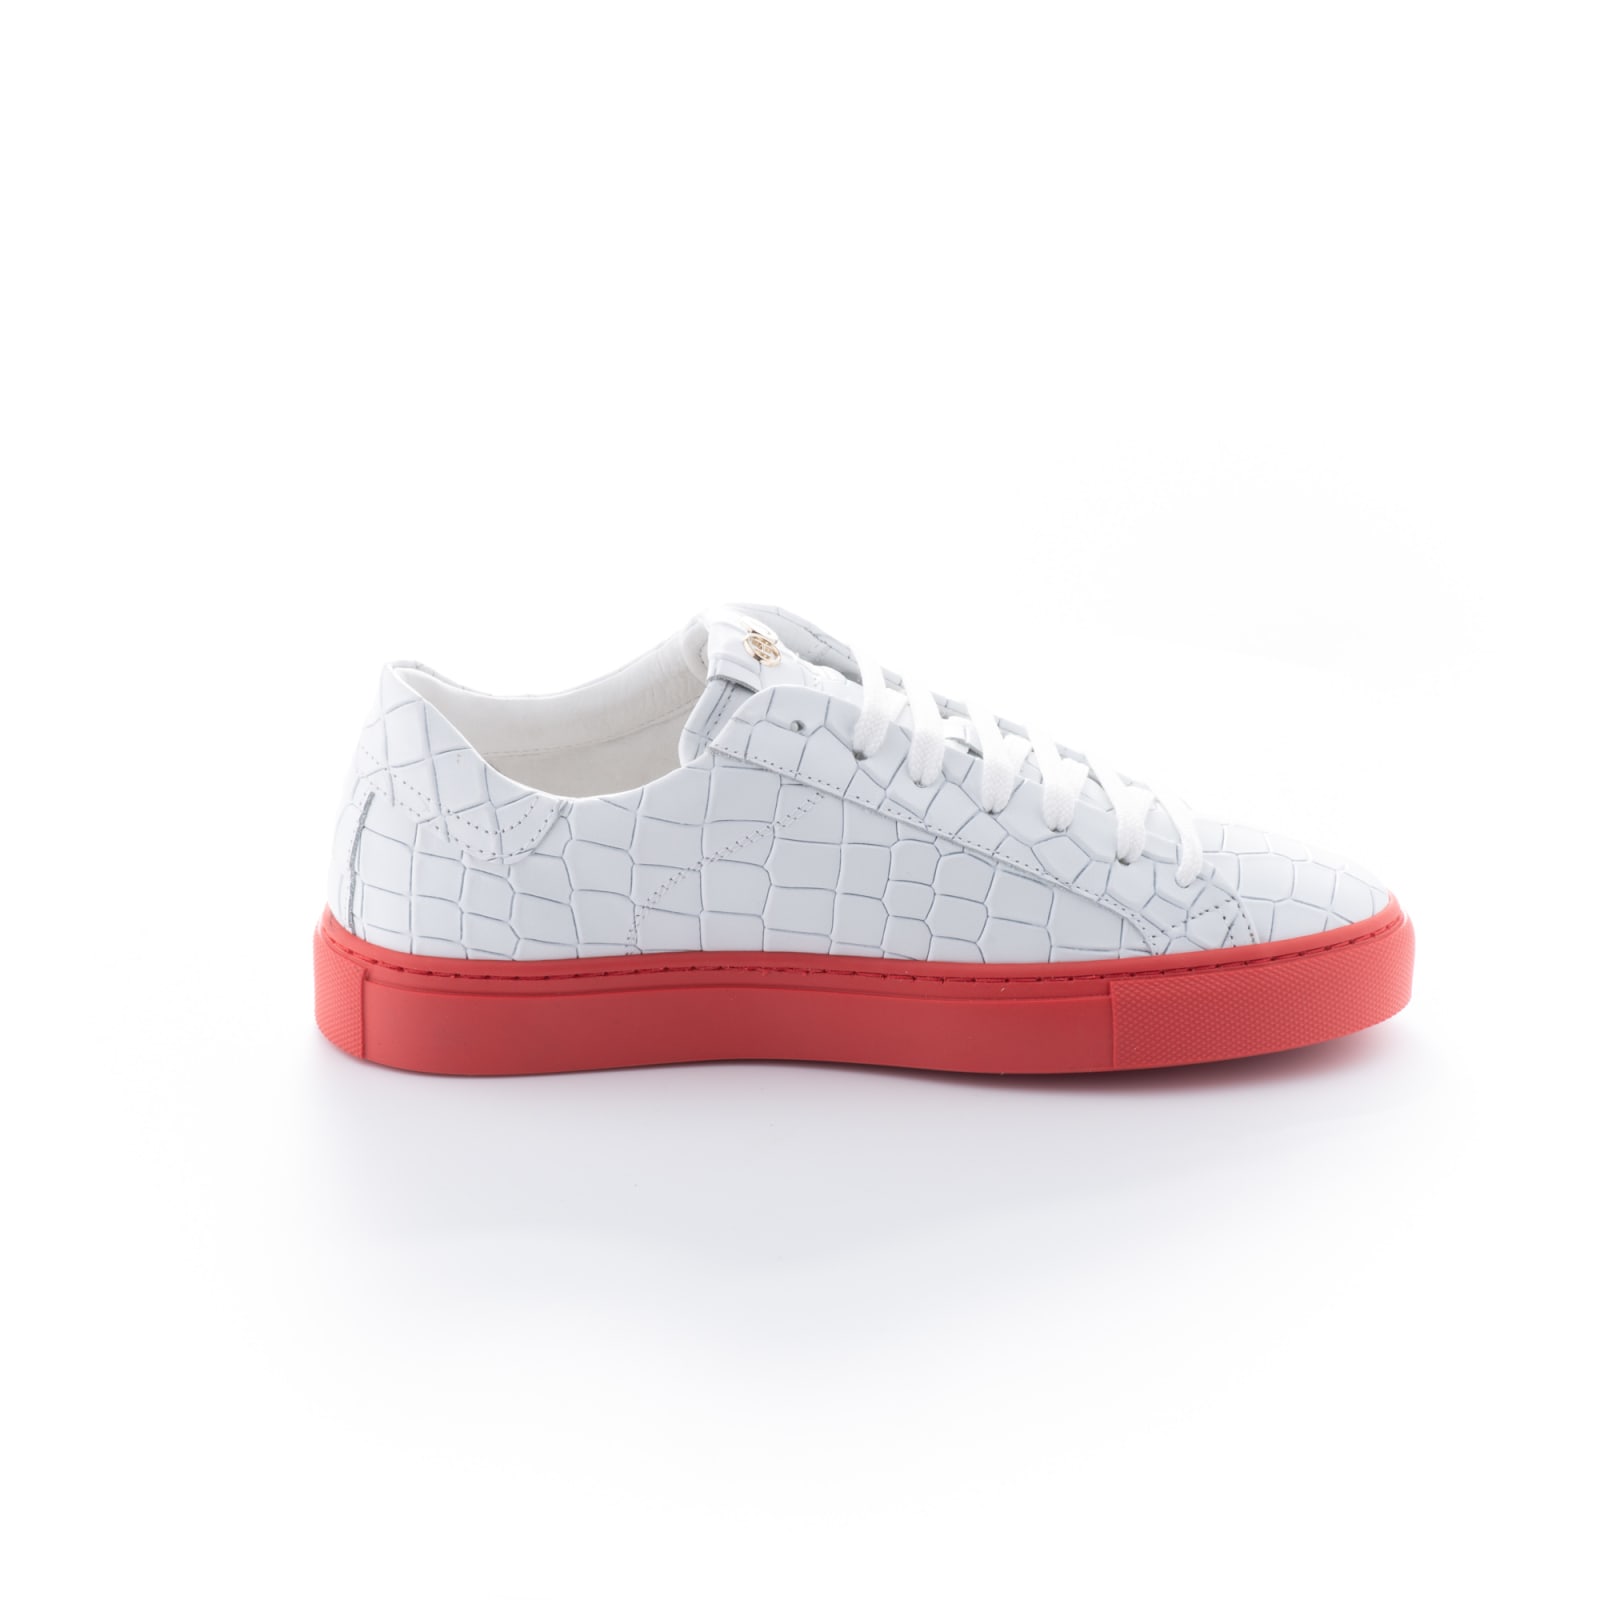 Hide & Jack Essence Tuscany White Red Sneakers